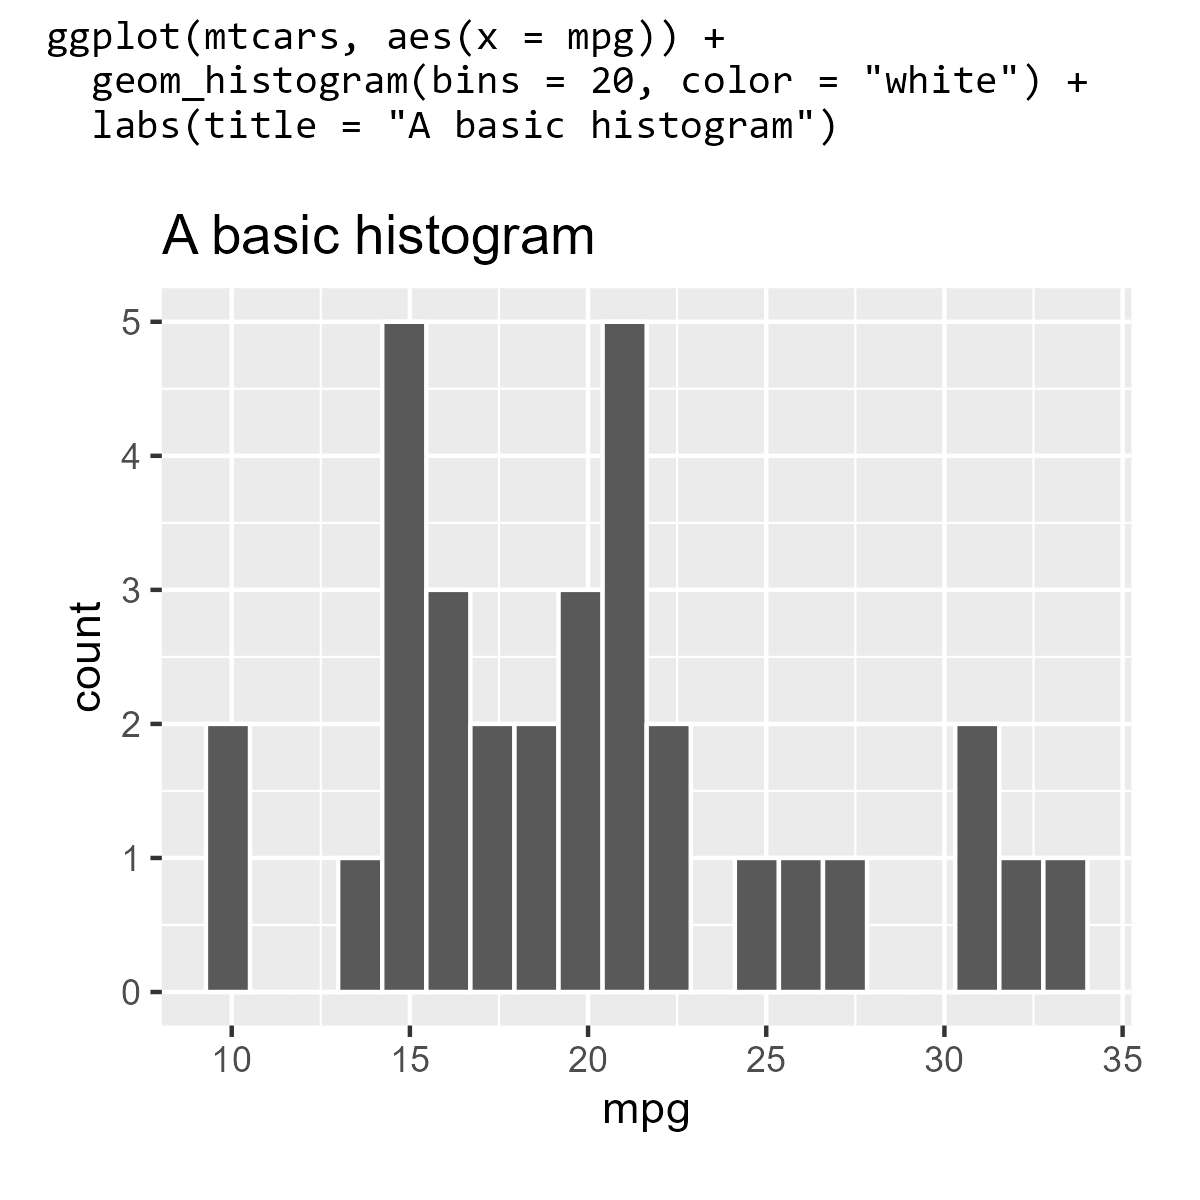 A ggplot2 plot of a histogram with the plotting code above the image. Here the title is in Consolas.